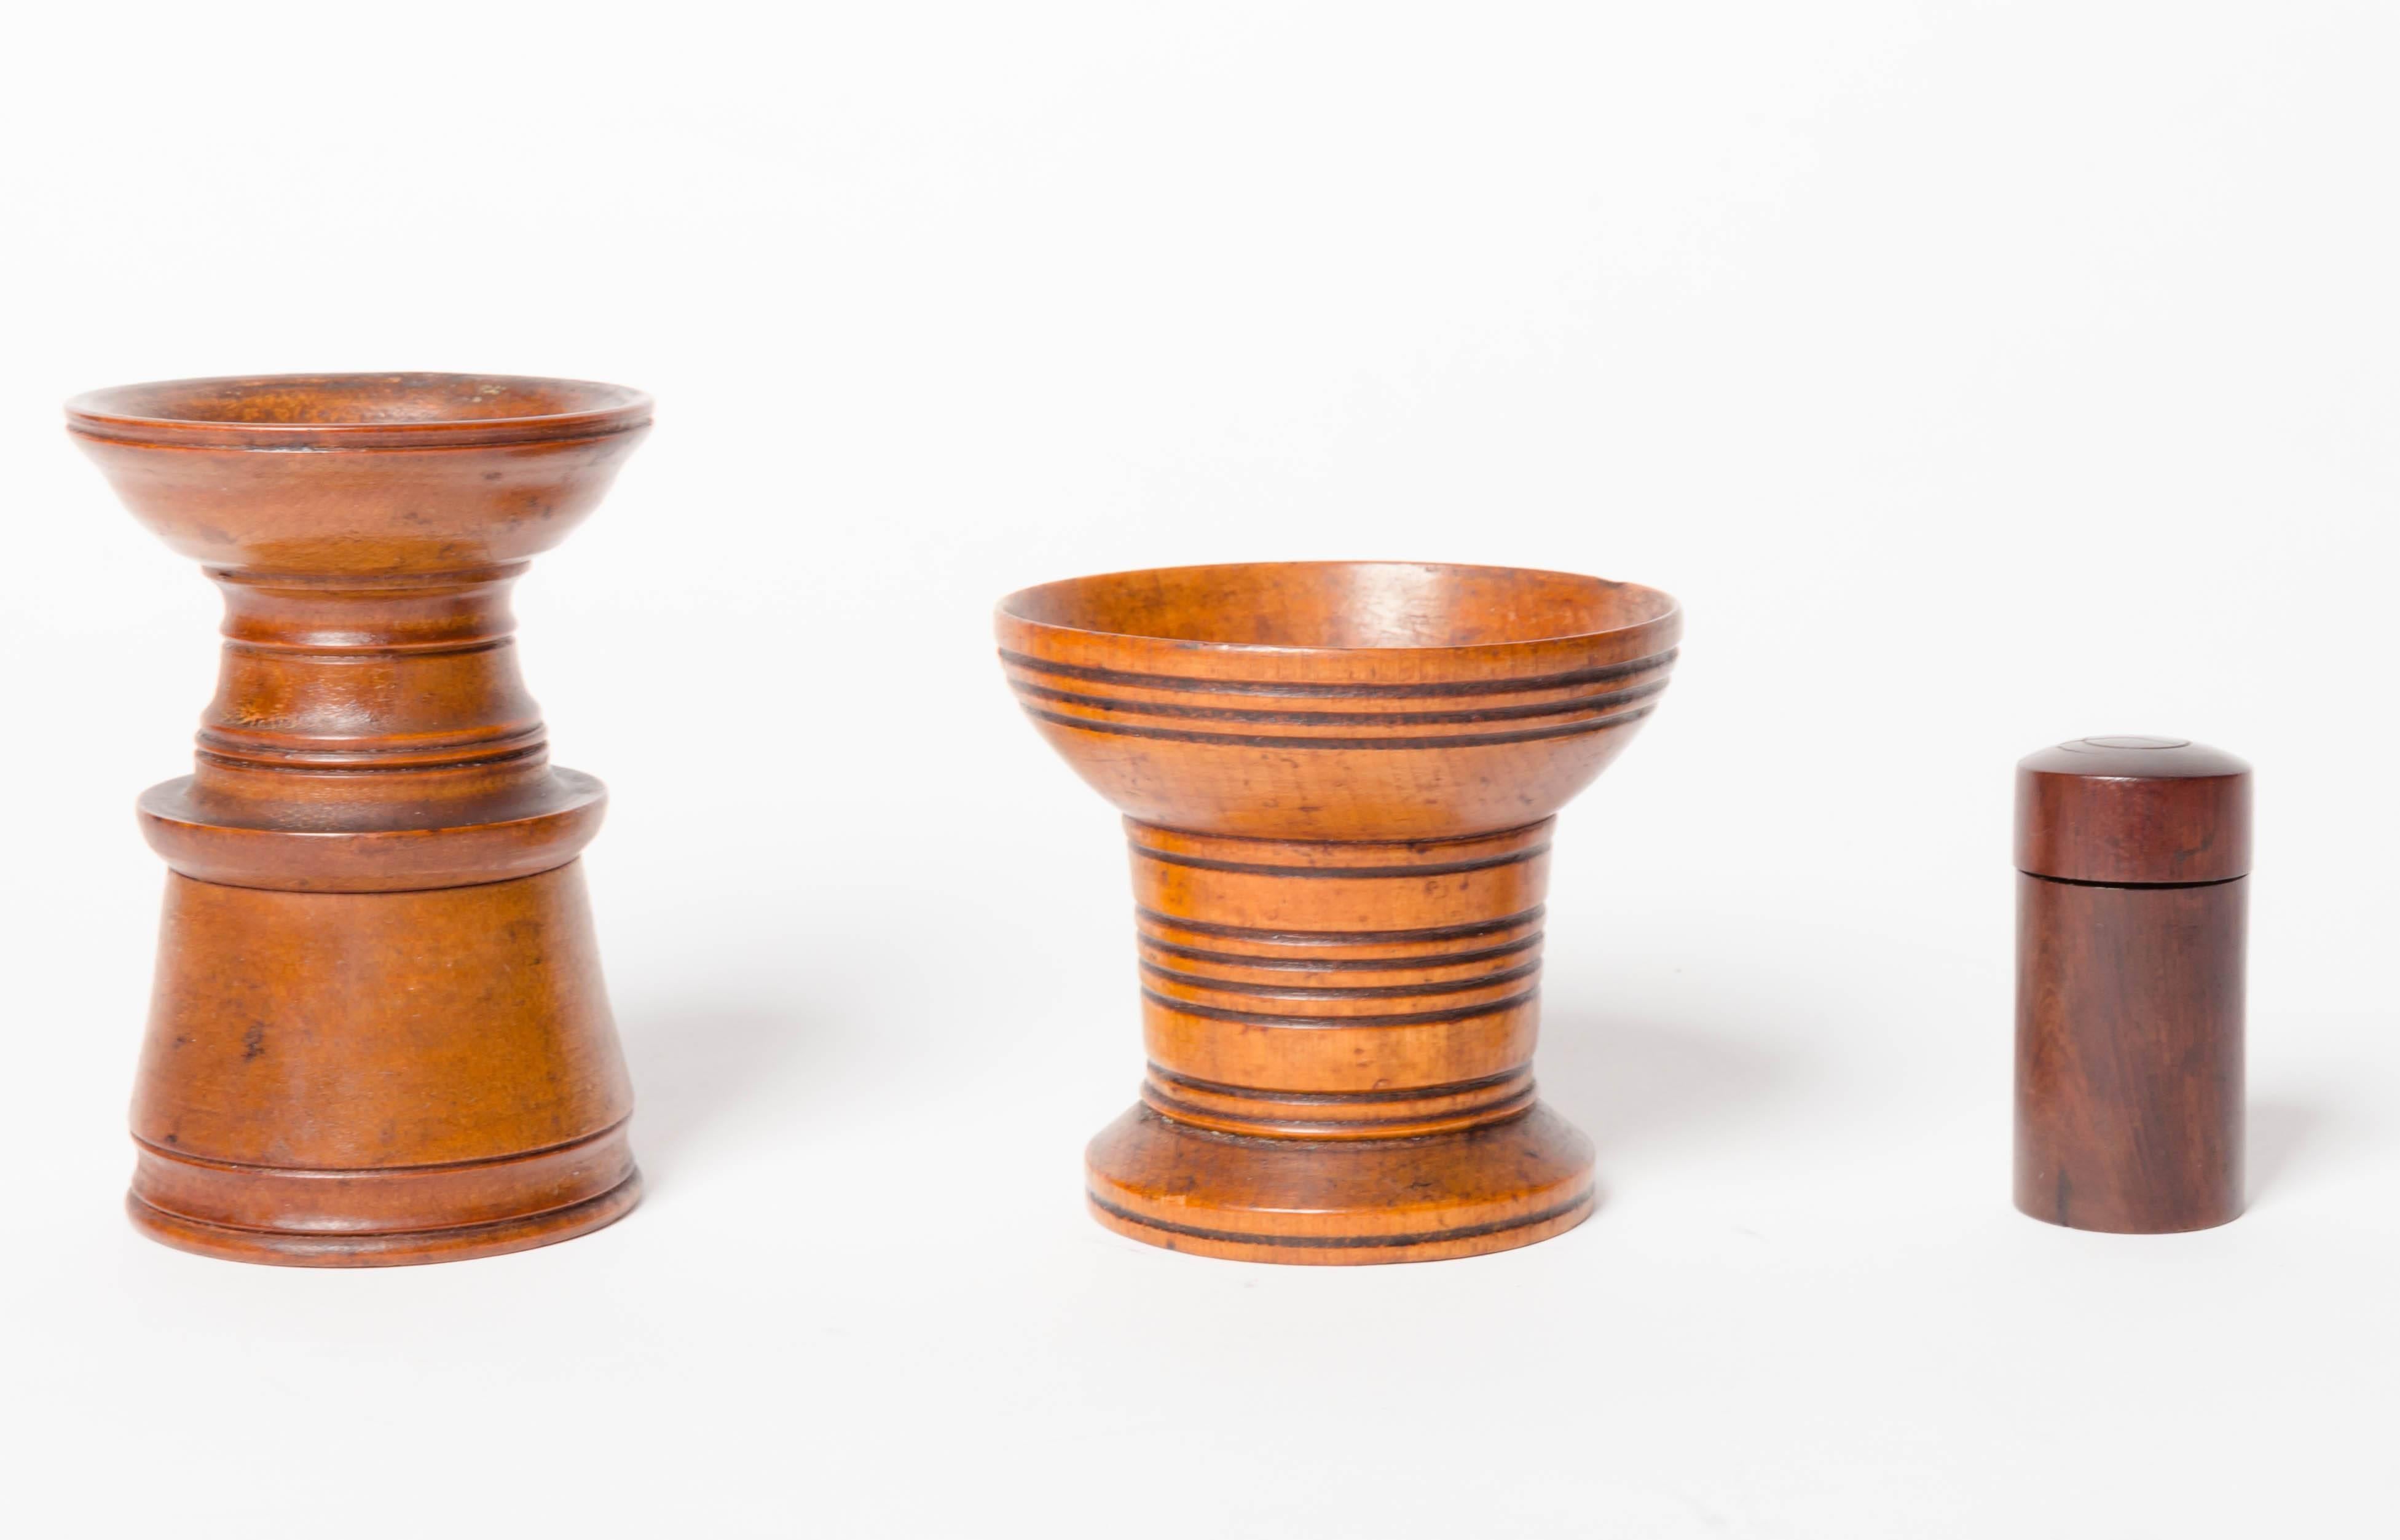 19th century English Treen collection. Consisting of two boxwood pounce pots (ink blotting shaker) and rosewood glass lined inkwell with screw cap. The pounce pots are 4